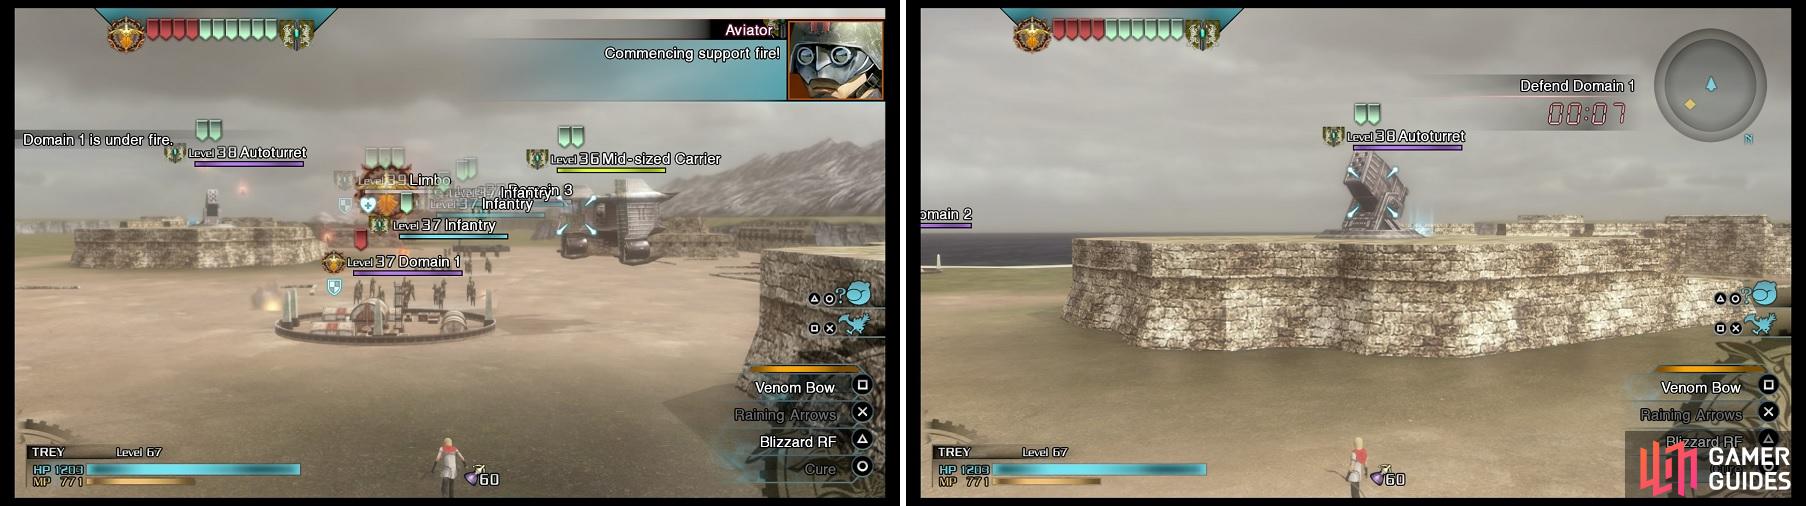 The start of the battle will put you right into the action, with a Carrier (left) attacking your Domain 1. A ranged character, such as Trey, will be able to hit the Autoturret (right) perched on top of the structure from the ground.